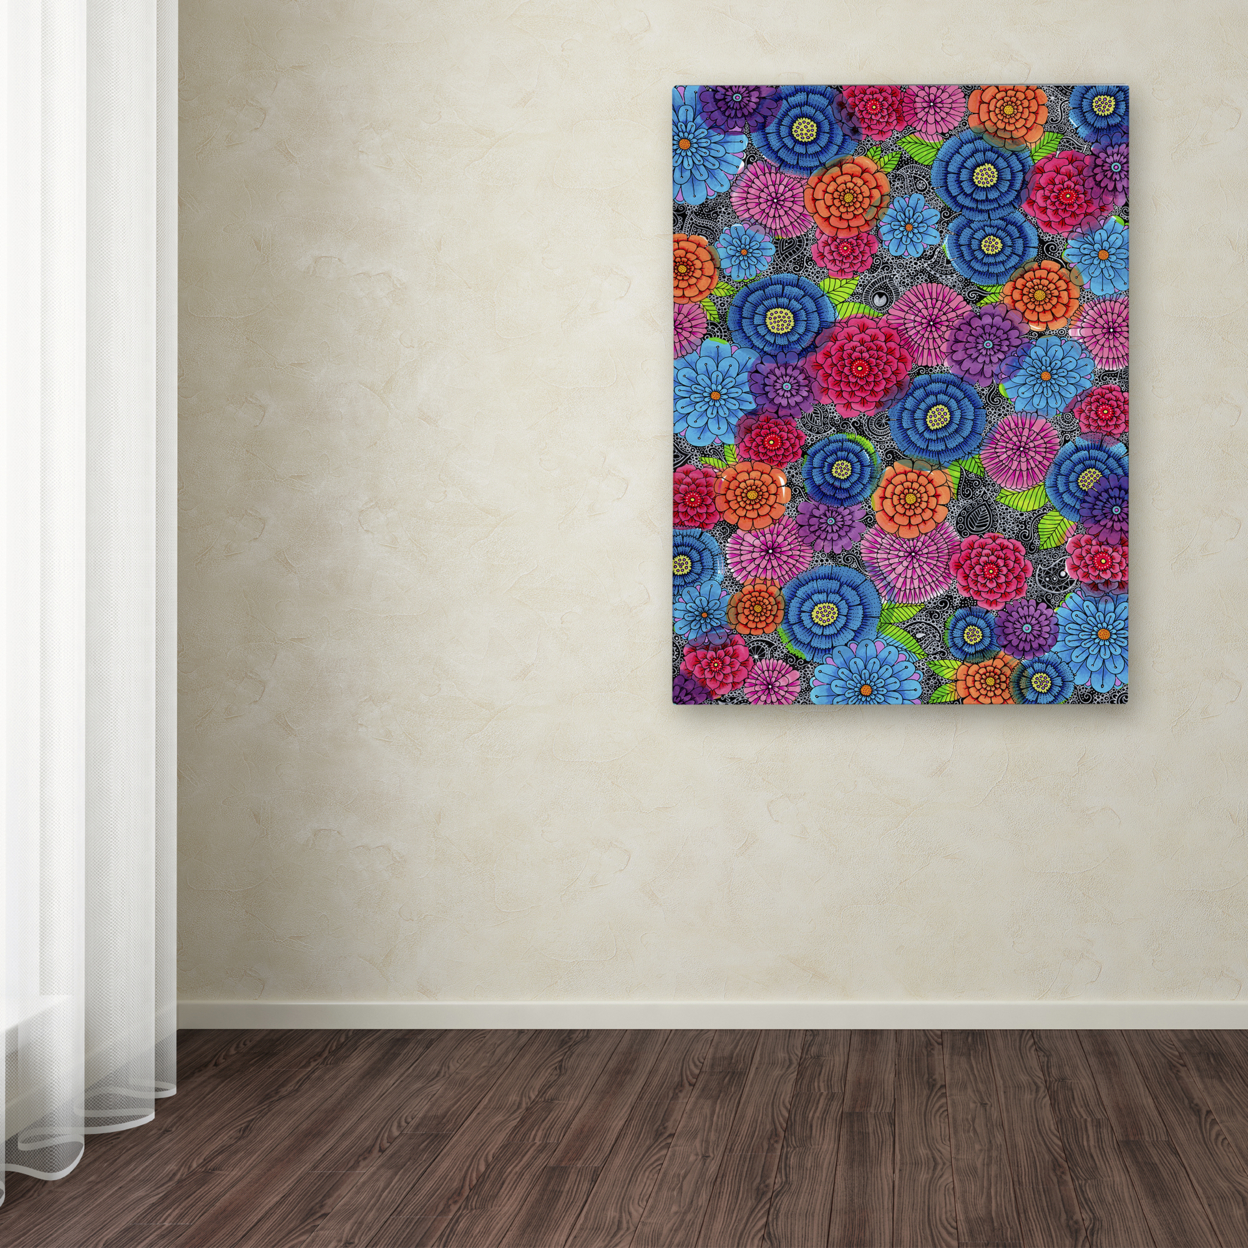 Hello Angel 'August Bouquet' Canvas Wall Art 35 X 47 Inches